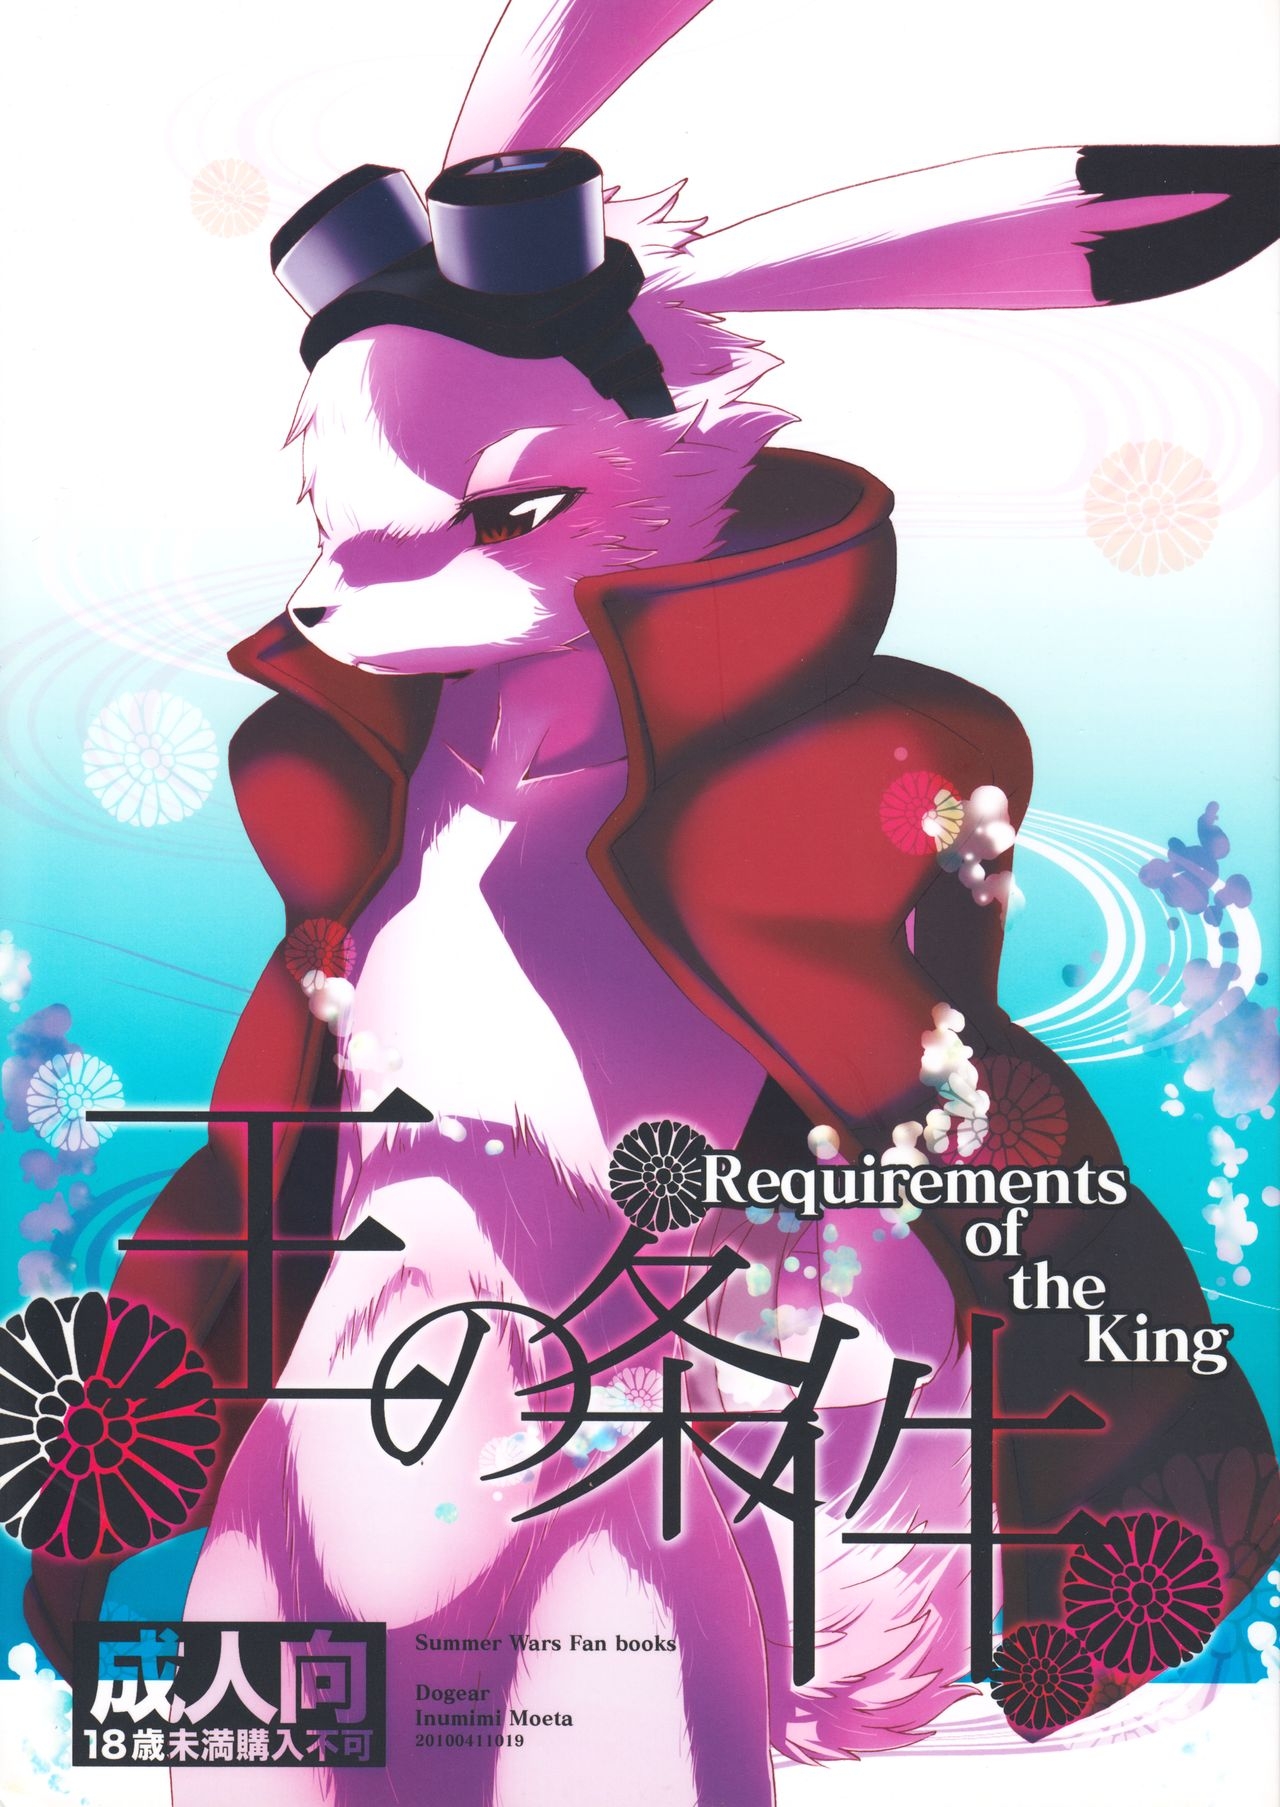 (KING of OZ) [Dogear (Inumimi Moeta)] Requirements of the King (Summer Wars) 0